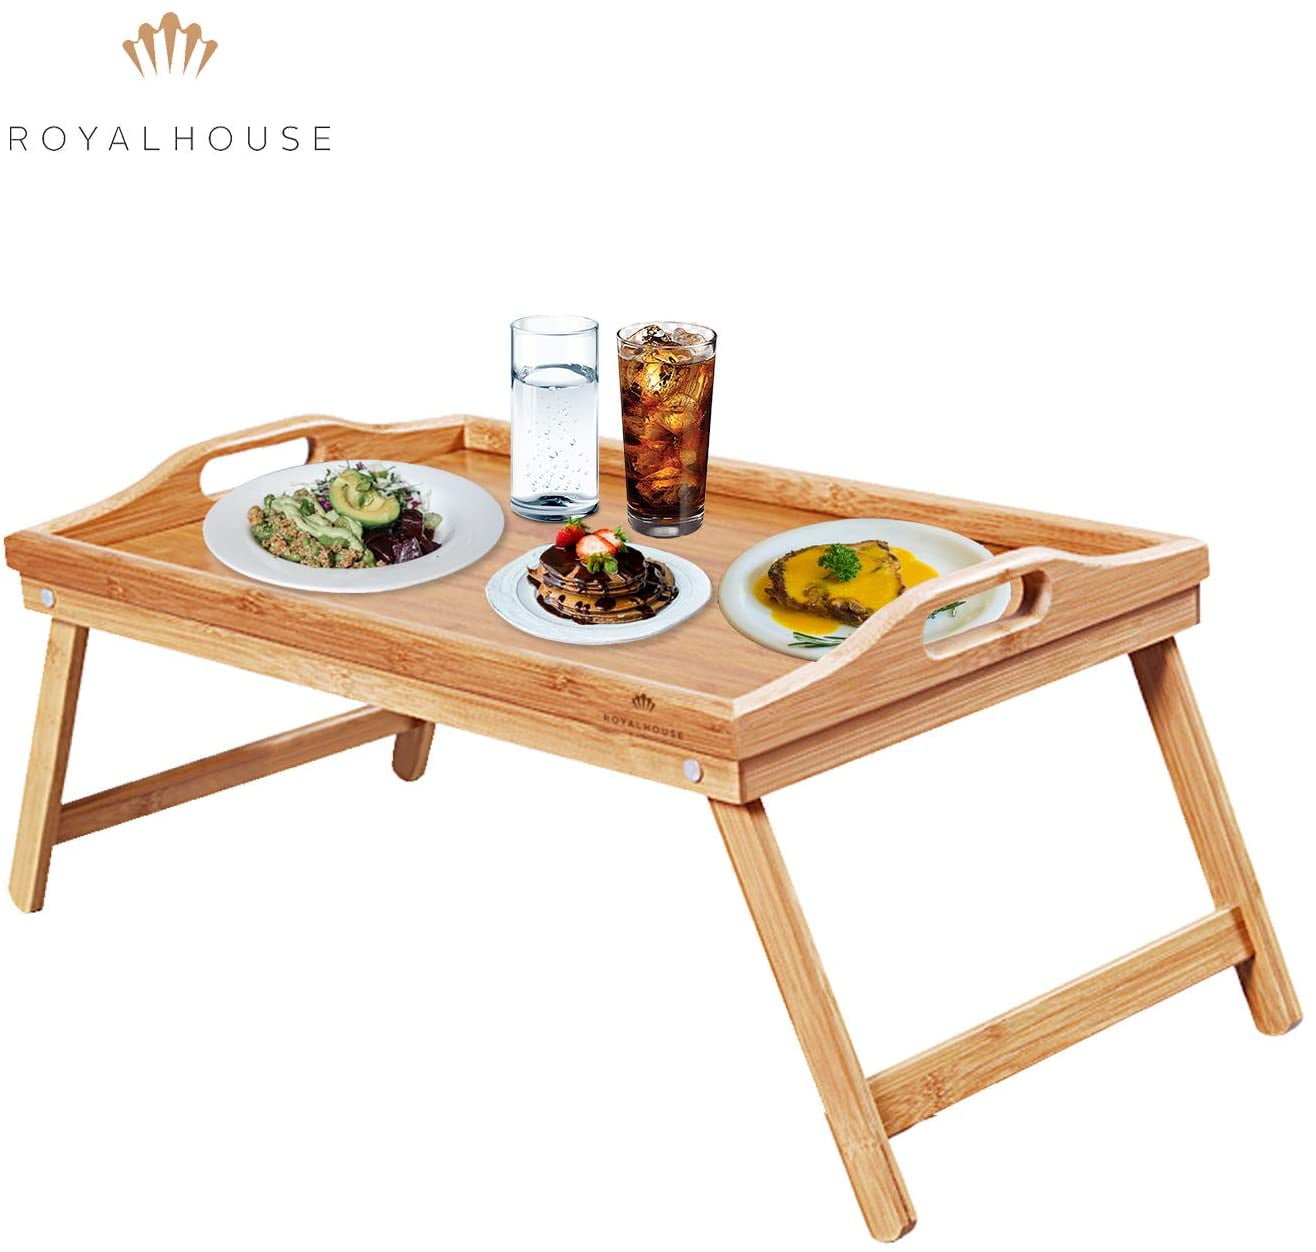 3Pcs/Set Wood Bamboo Breakfast Serving Bed Tray With Handle Set Lap US 